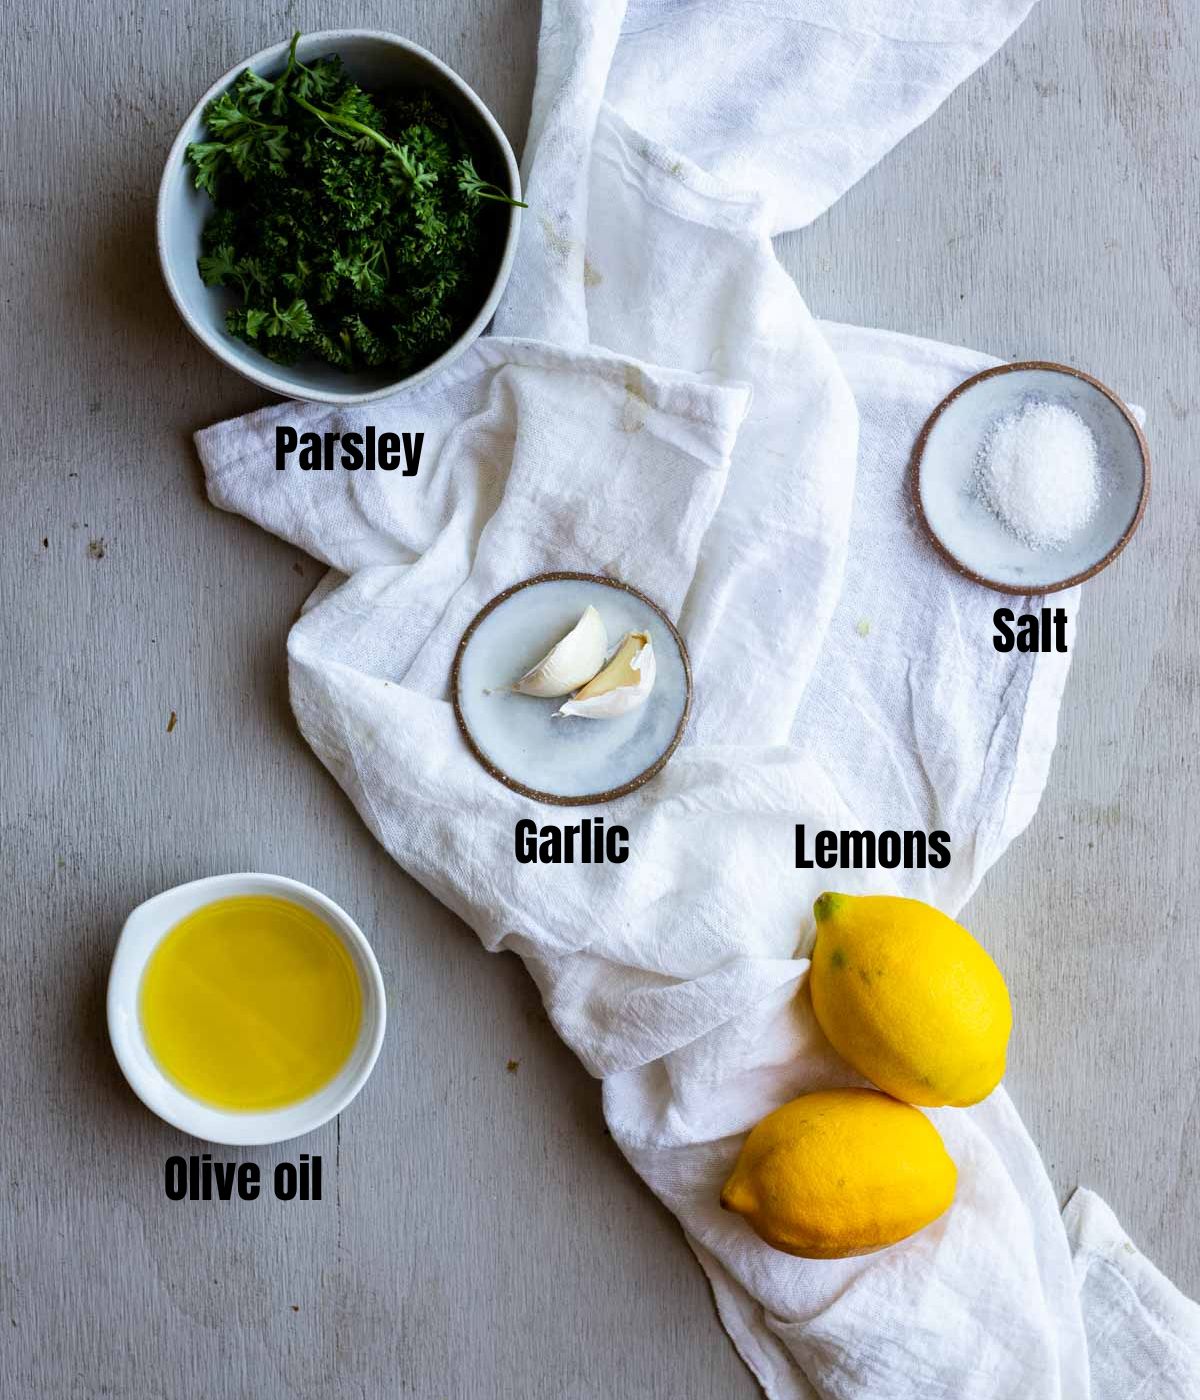 Ingredients to make gremolata arranged individually and labelled.